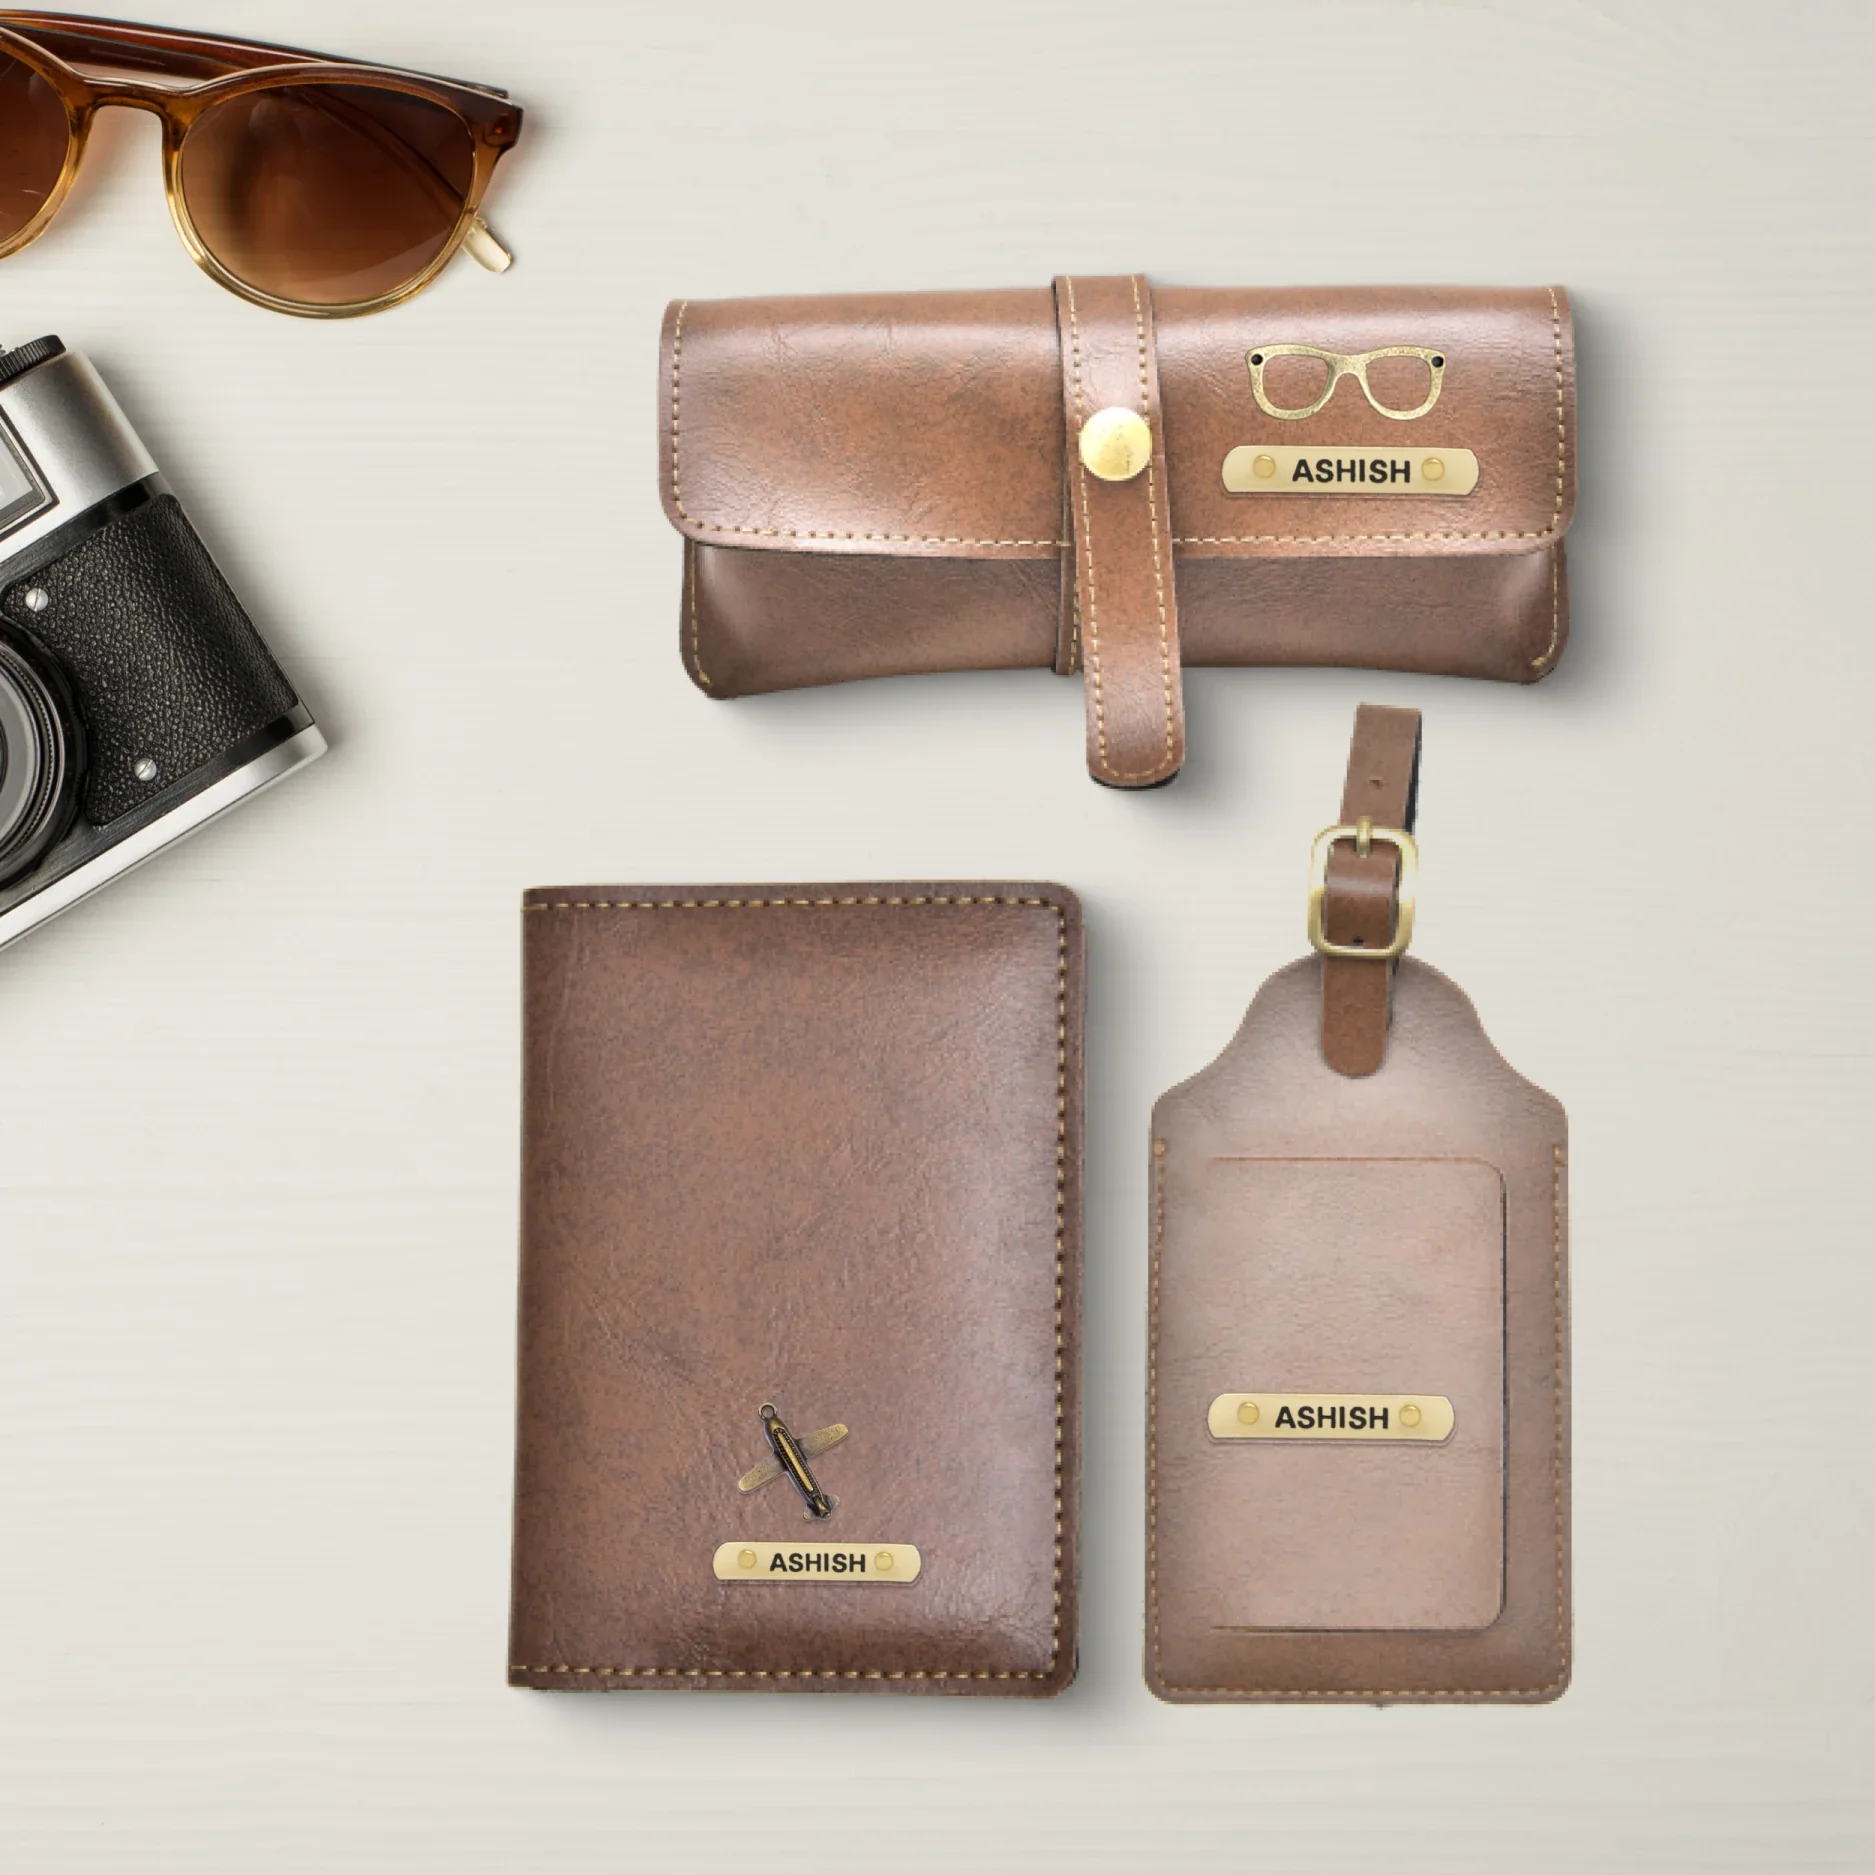 Available in a variety of colours, this combo comes with a Personalized Leather Passport Cover, Eyewear case and a luggage tag